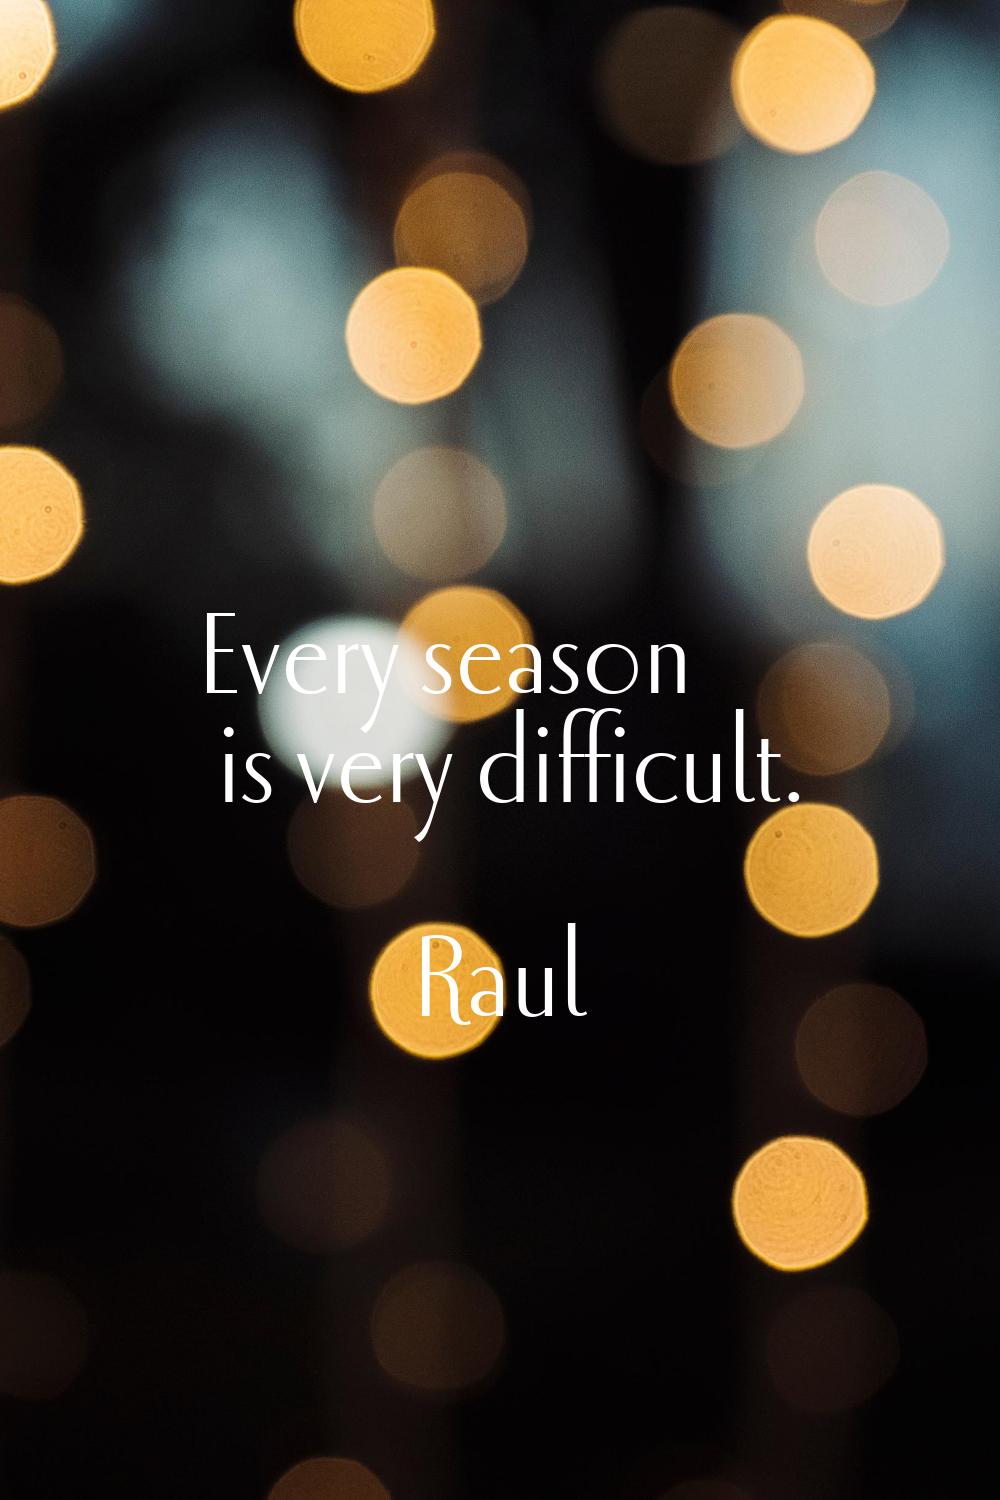 Every season is very difficult.